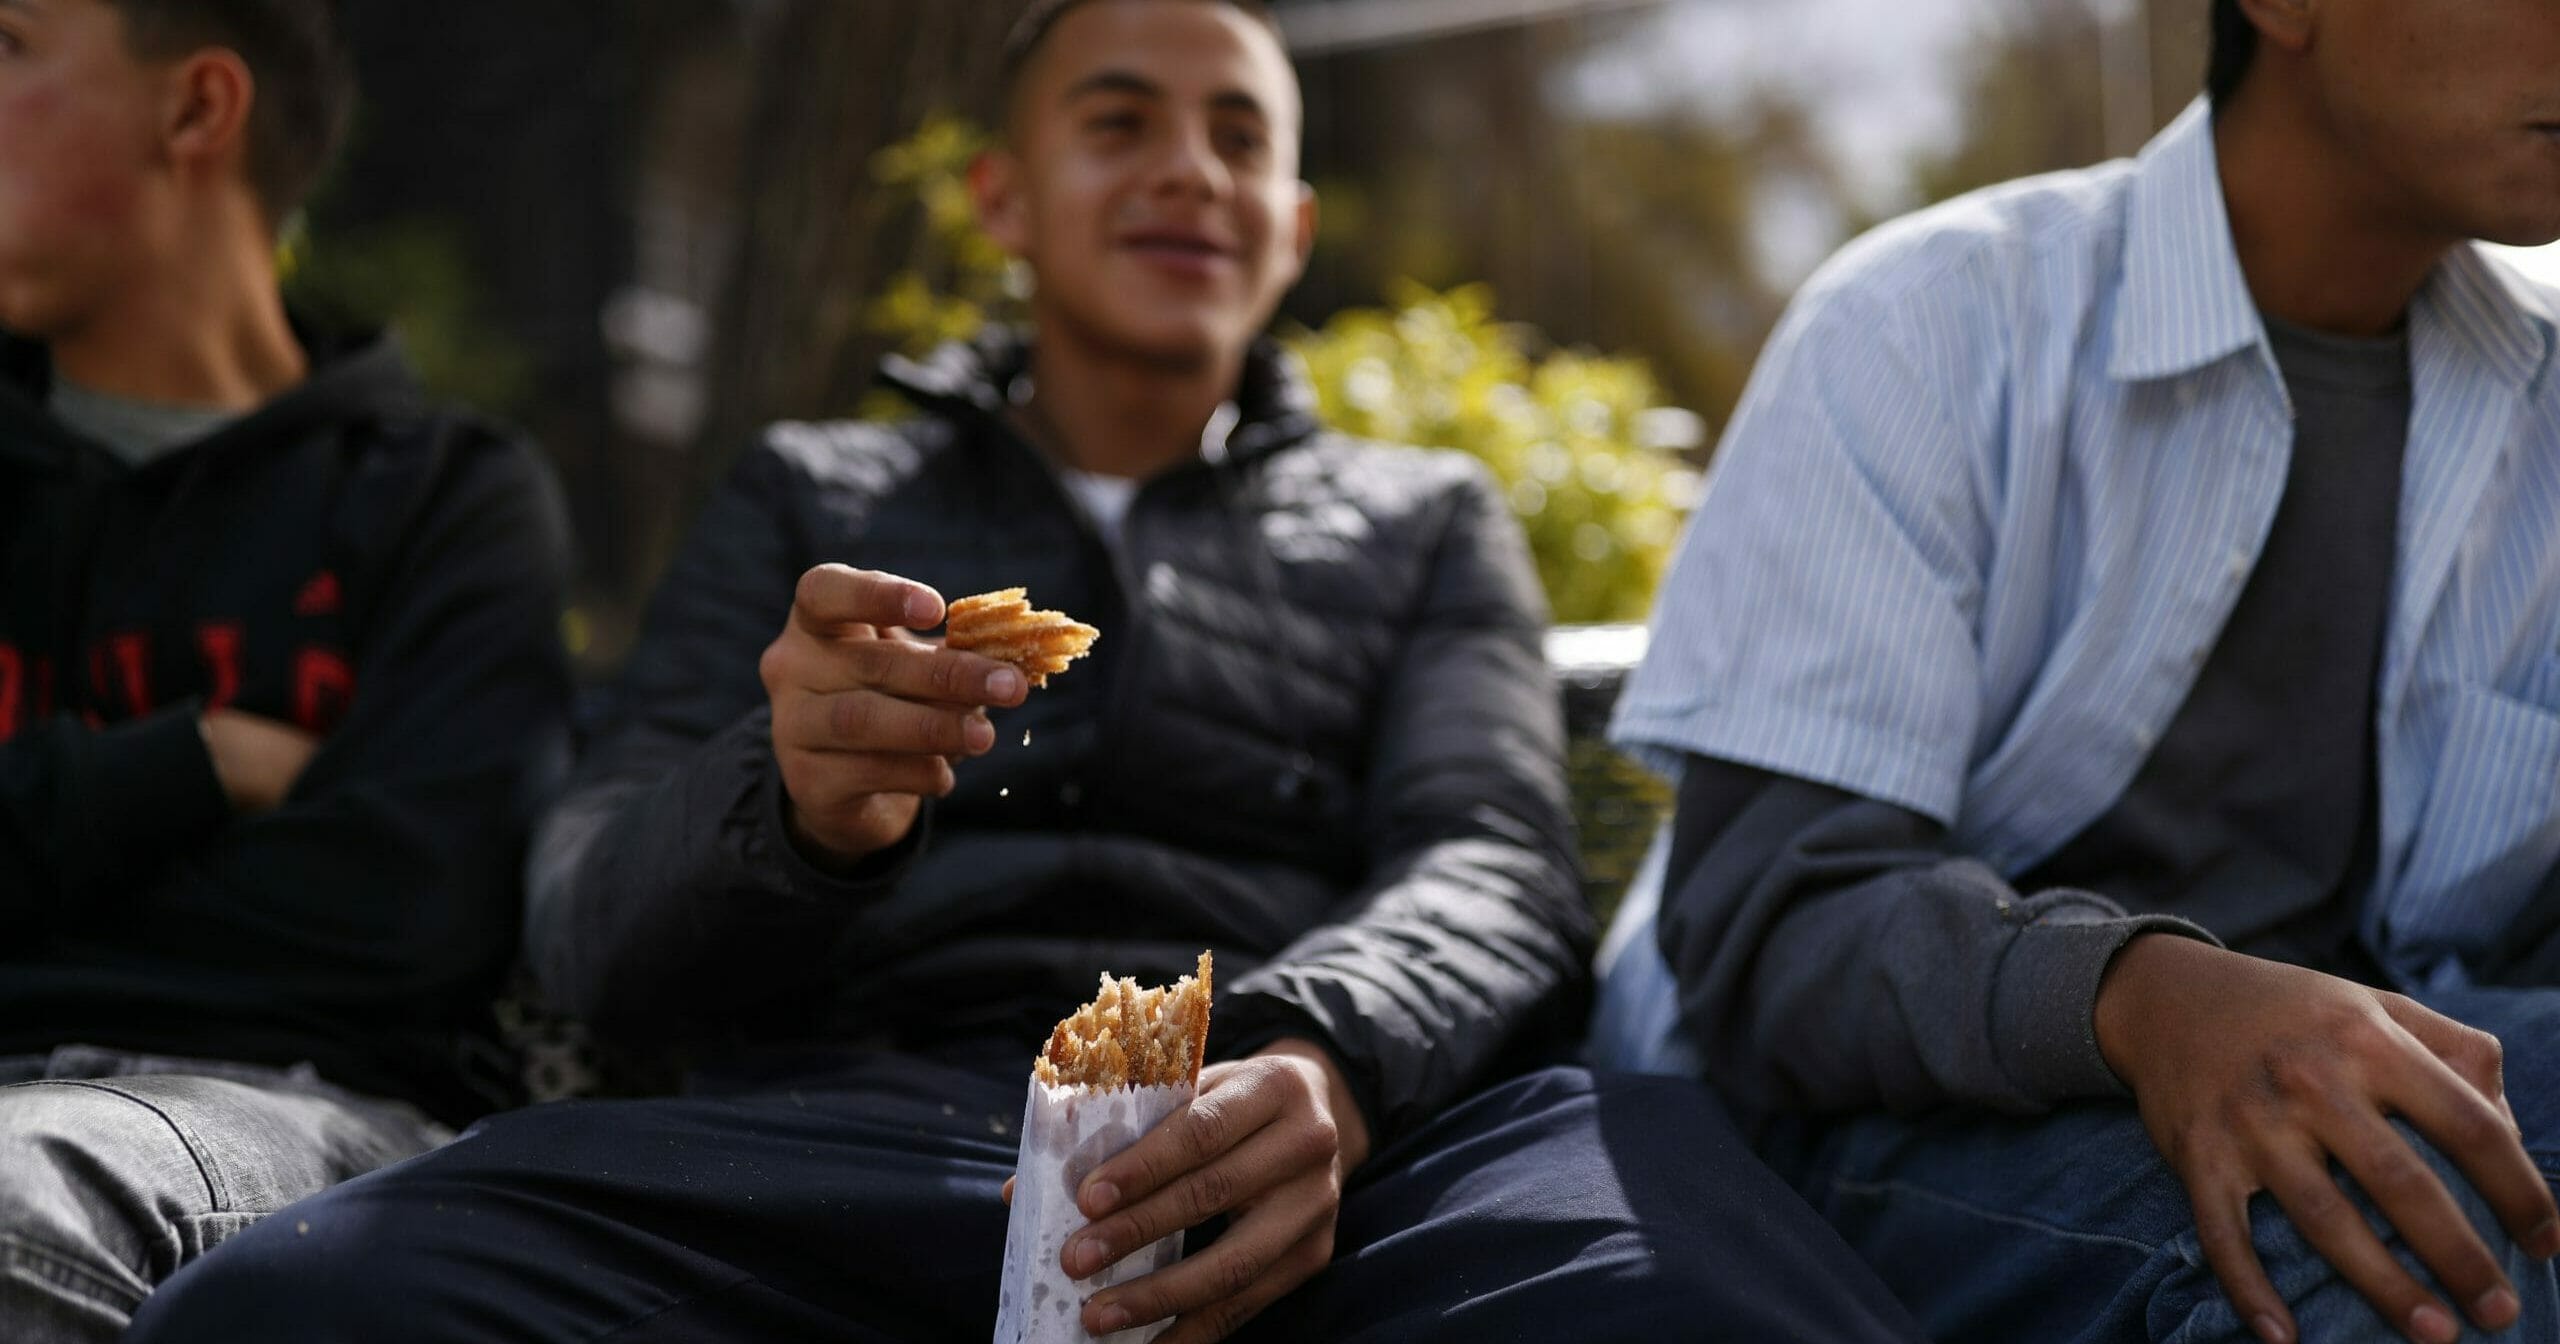 A young man eats churros packaged in a thin paper bag, purchased from a walking vendor carrying his wares in a woven basket, in Mexico City on Dec. 31, 2019. A new law takes effect Jan. 1, 2020, prohibiting the plastic bags that became ubiquitous over the last 30 years.